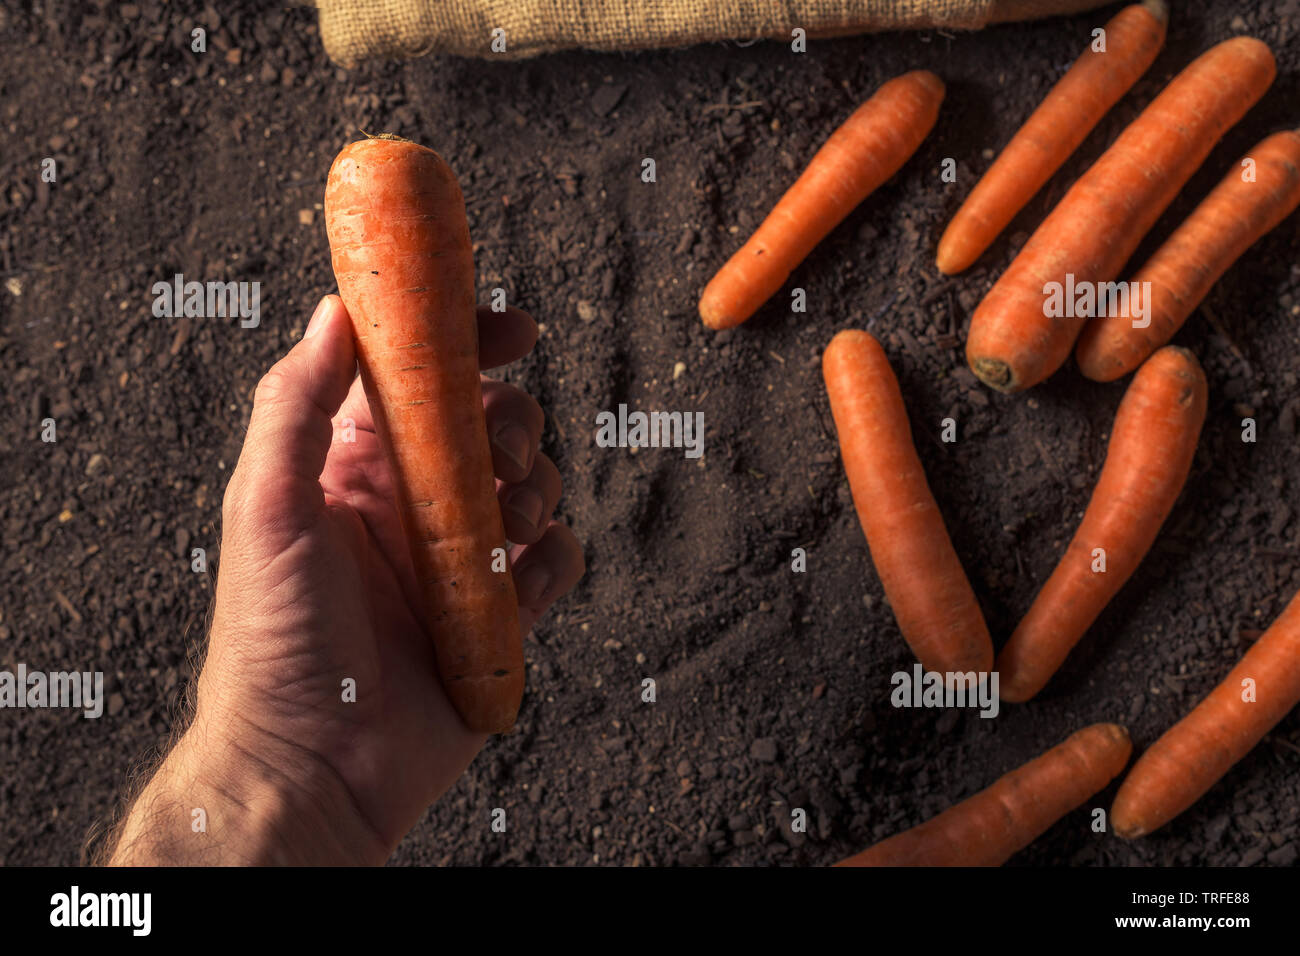 Hand holding harvested carrot root vegetable, harvested organic homegrown produce Stock Photo